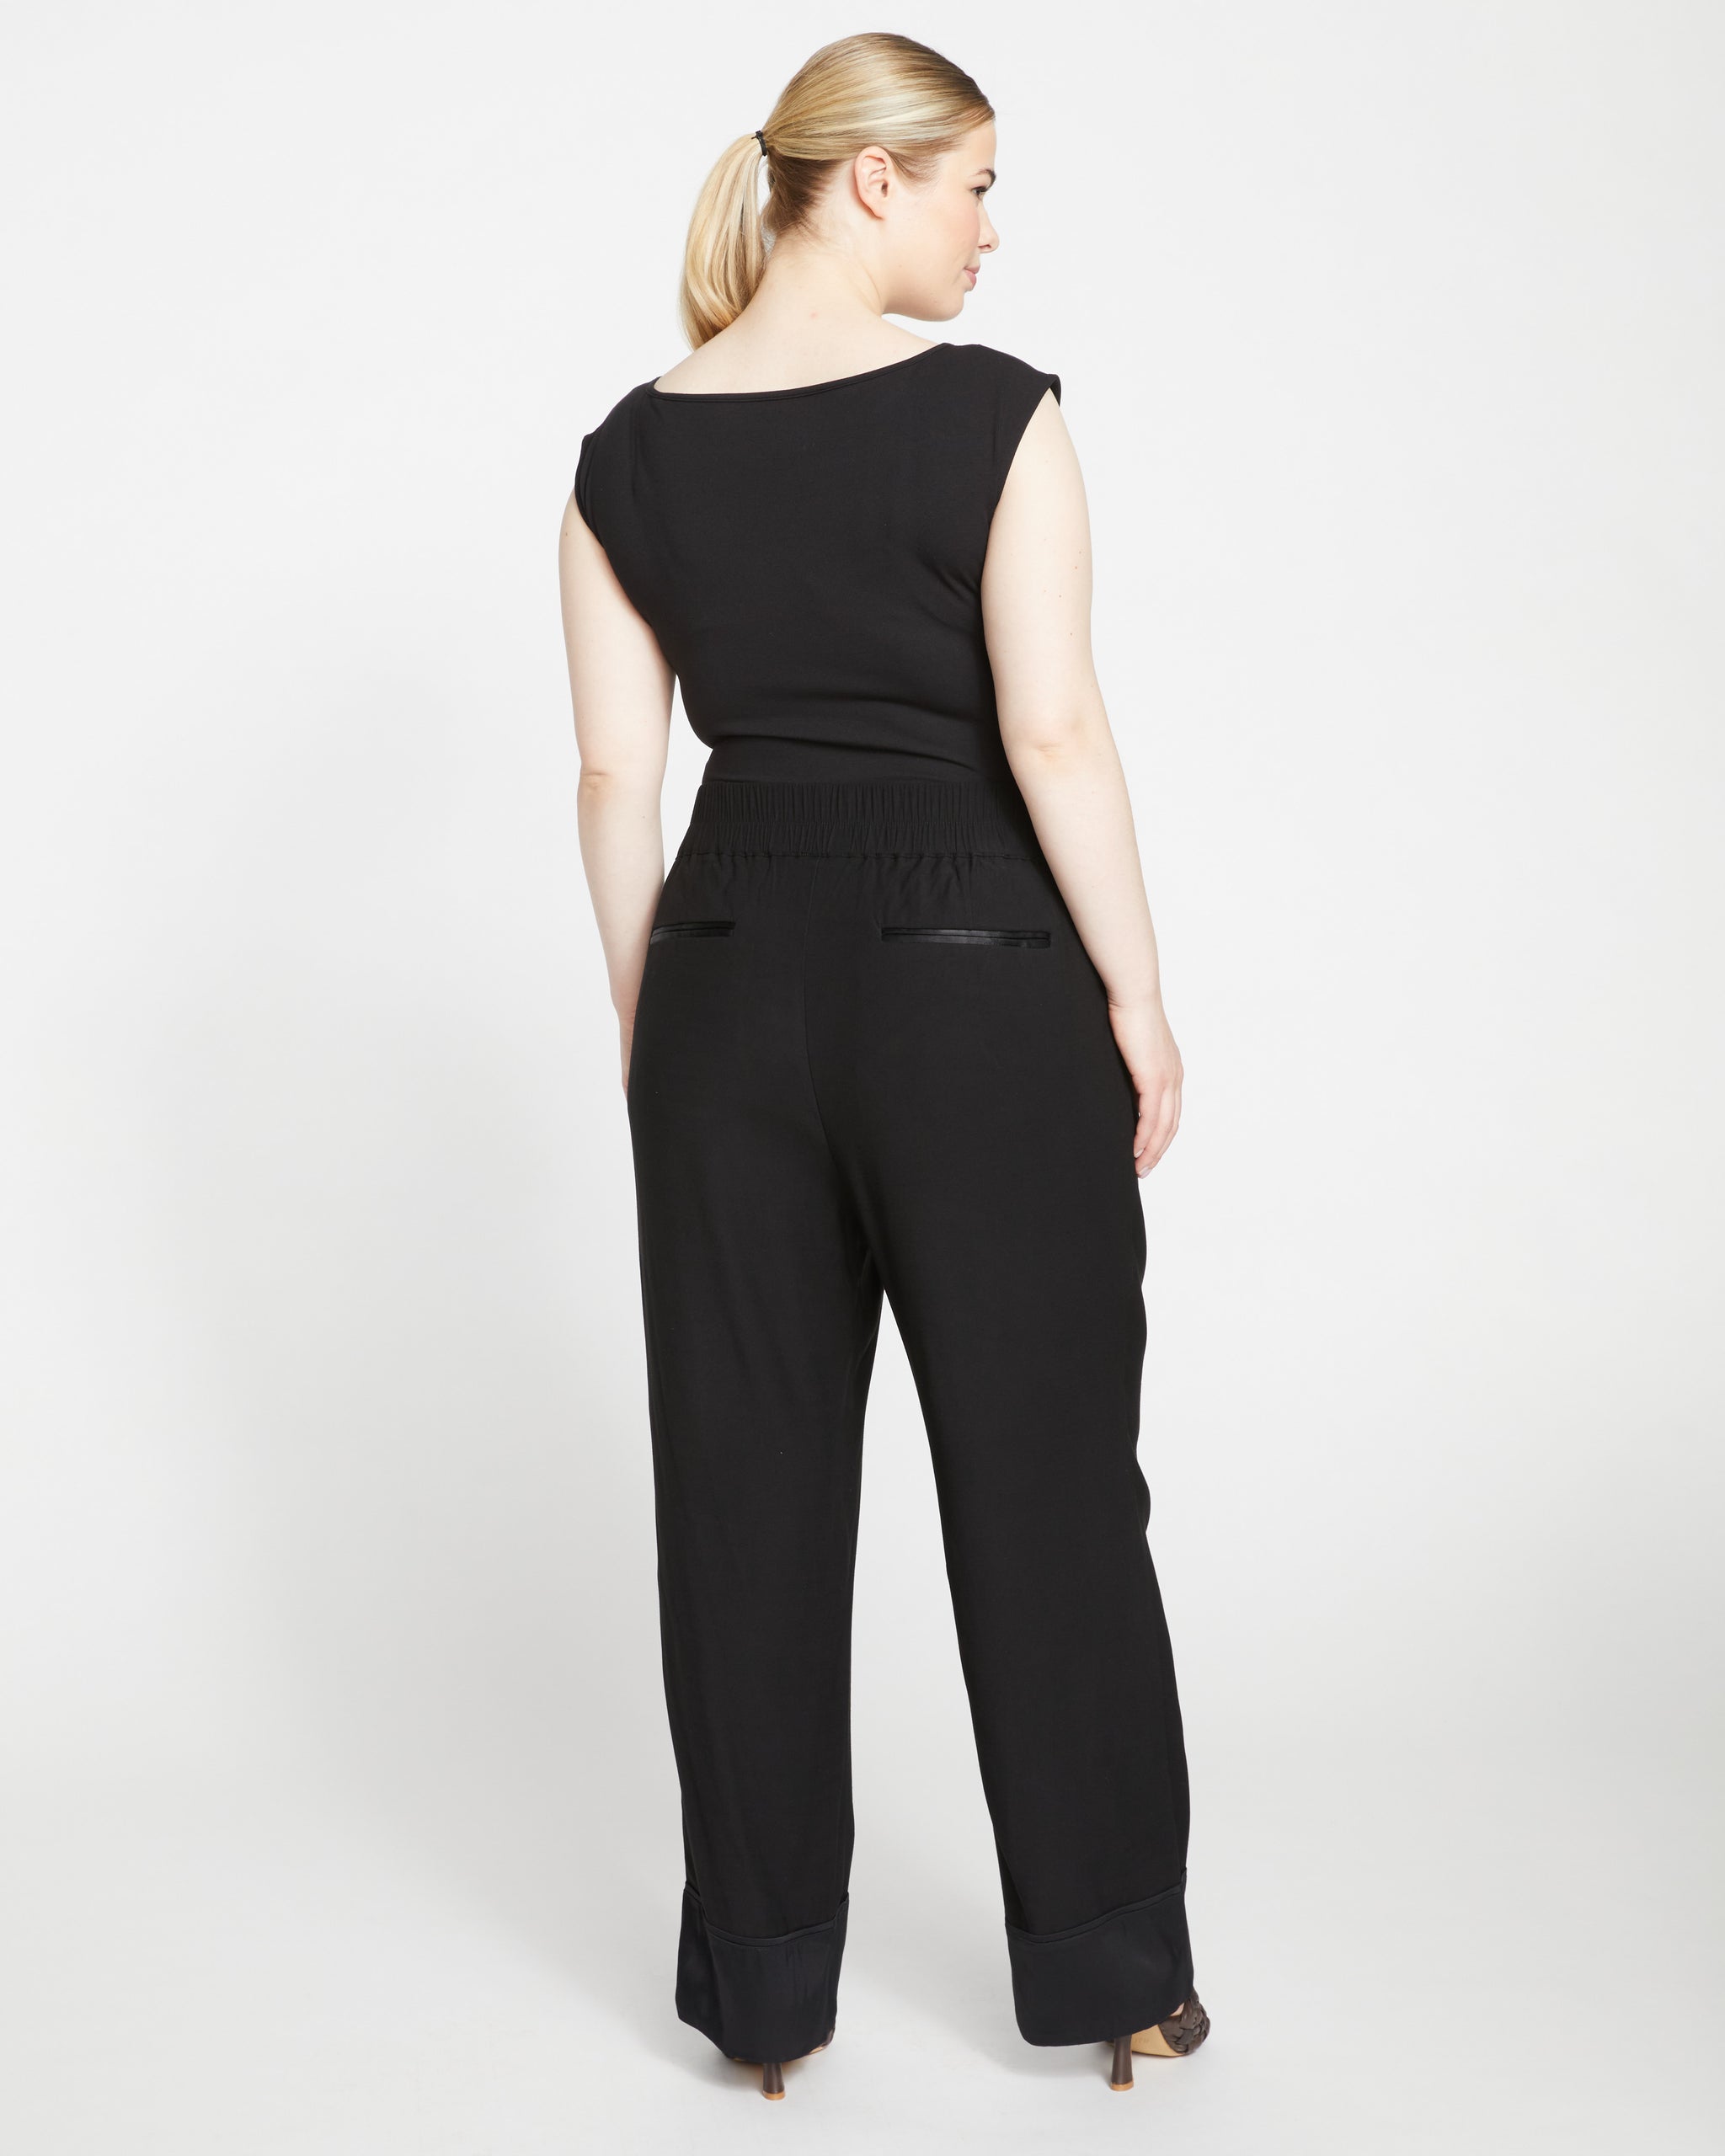 Soiree Double Luxe Pull-On Pants - Black/Black Shine